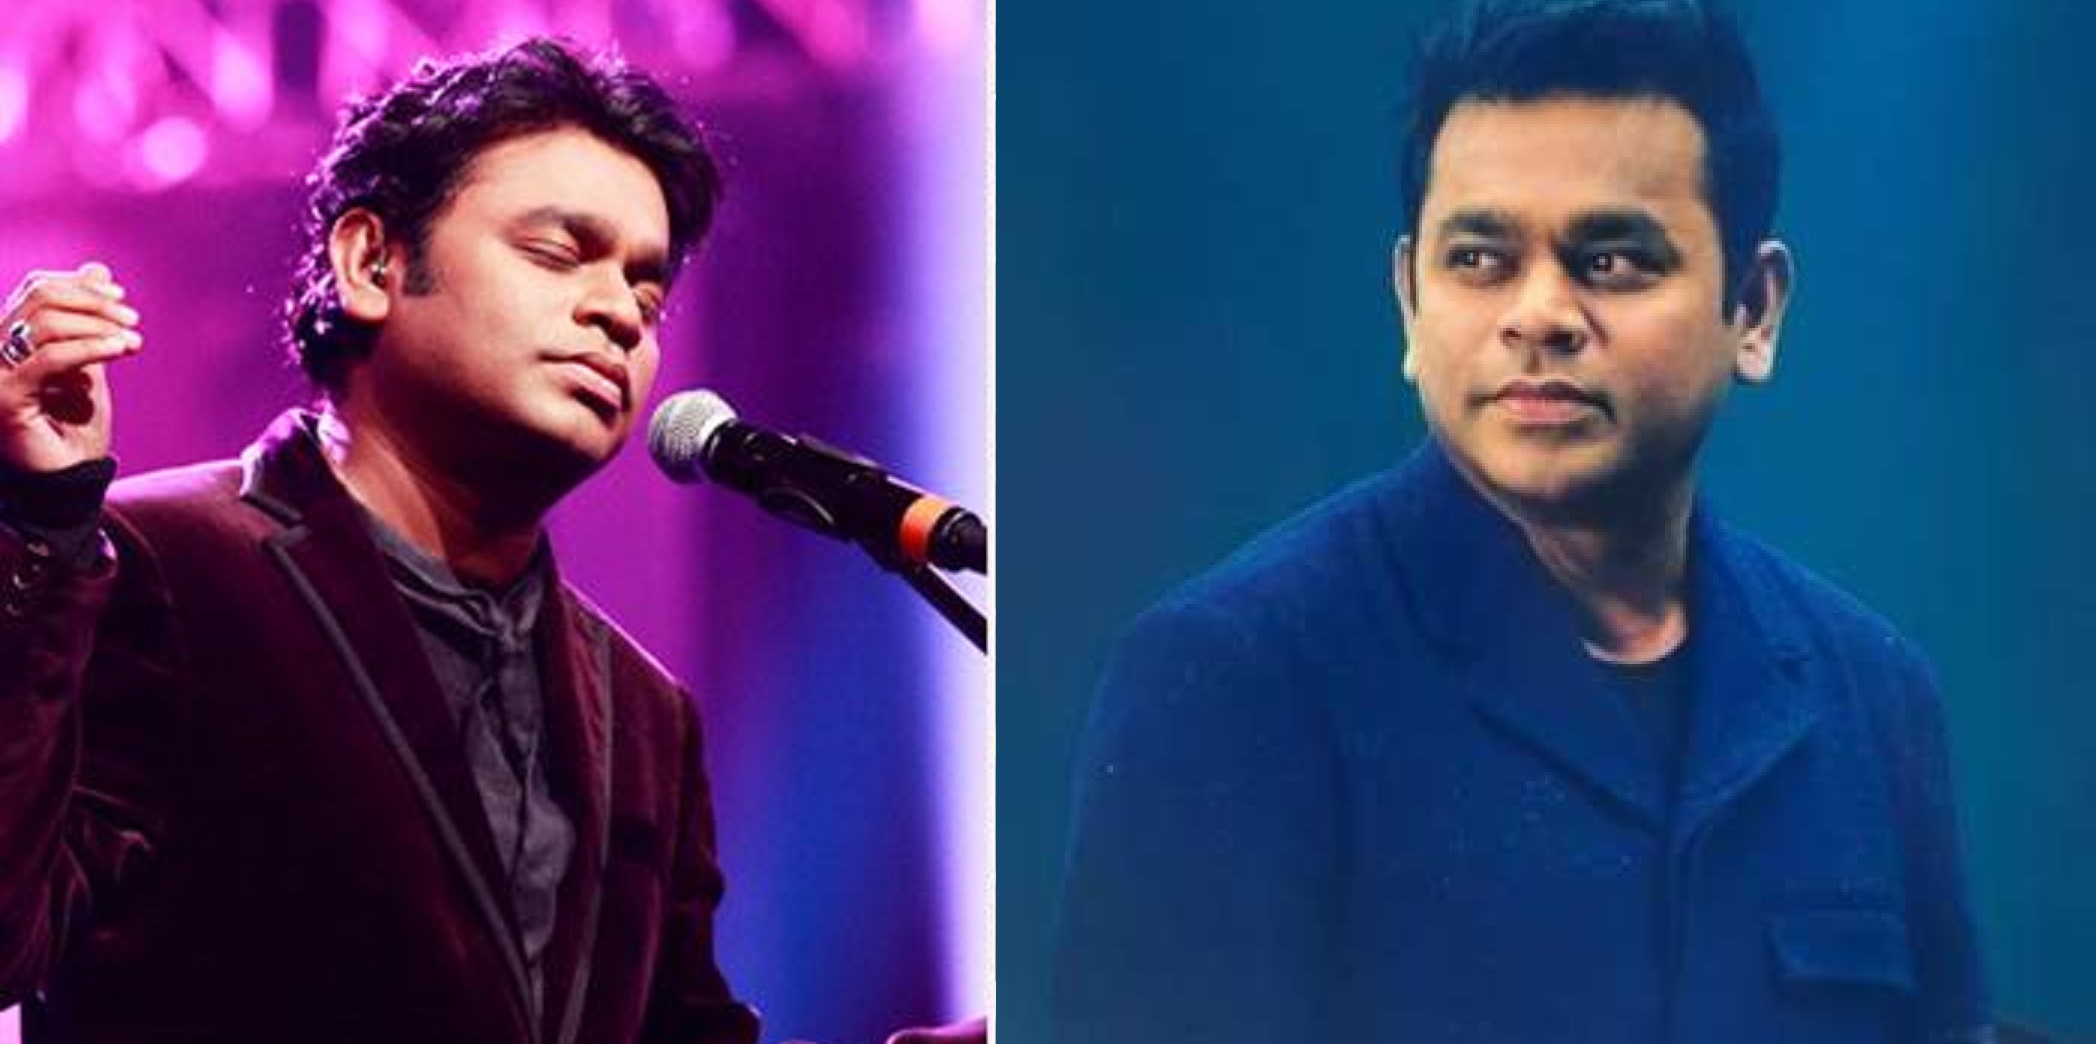 Top 10 Best Hindi Songs In The Voice Of A.R. Rahman